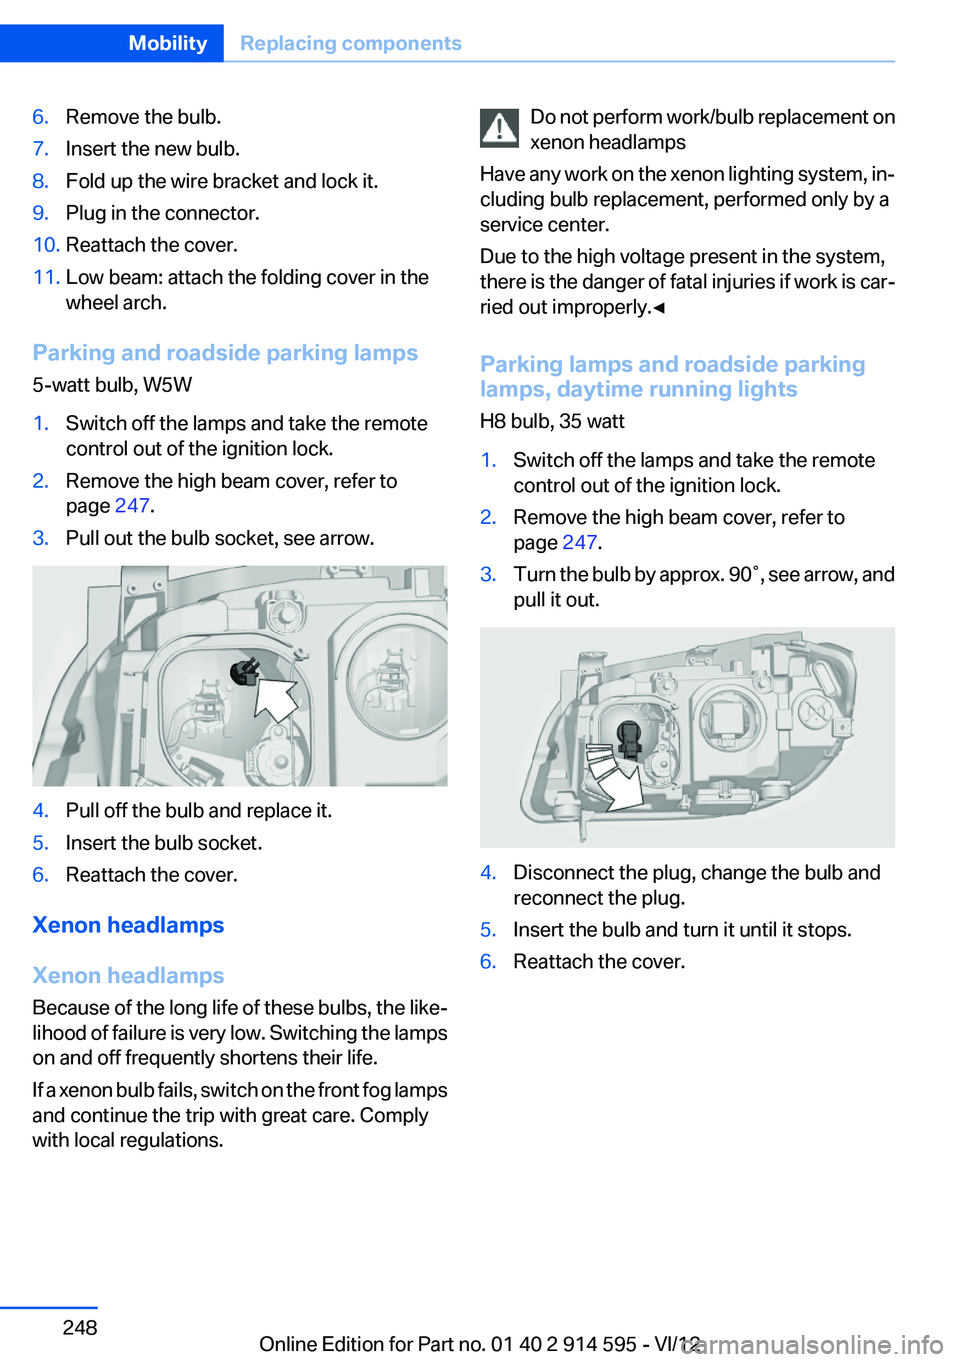 BMW X1 SDRIVE28I 2013  Owners Manual 6.Remove the bulb.7.Insert the new bulb.8.Fold up the wire bracket and lock it.9.Plug in the connector.10.Reattach the cover.11.Low beam: attach the folding cover in the
wheel arch.
Parking and roadsi